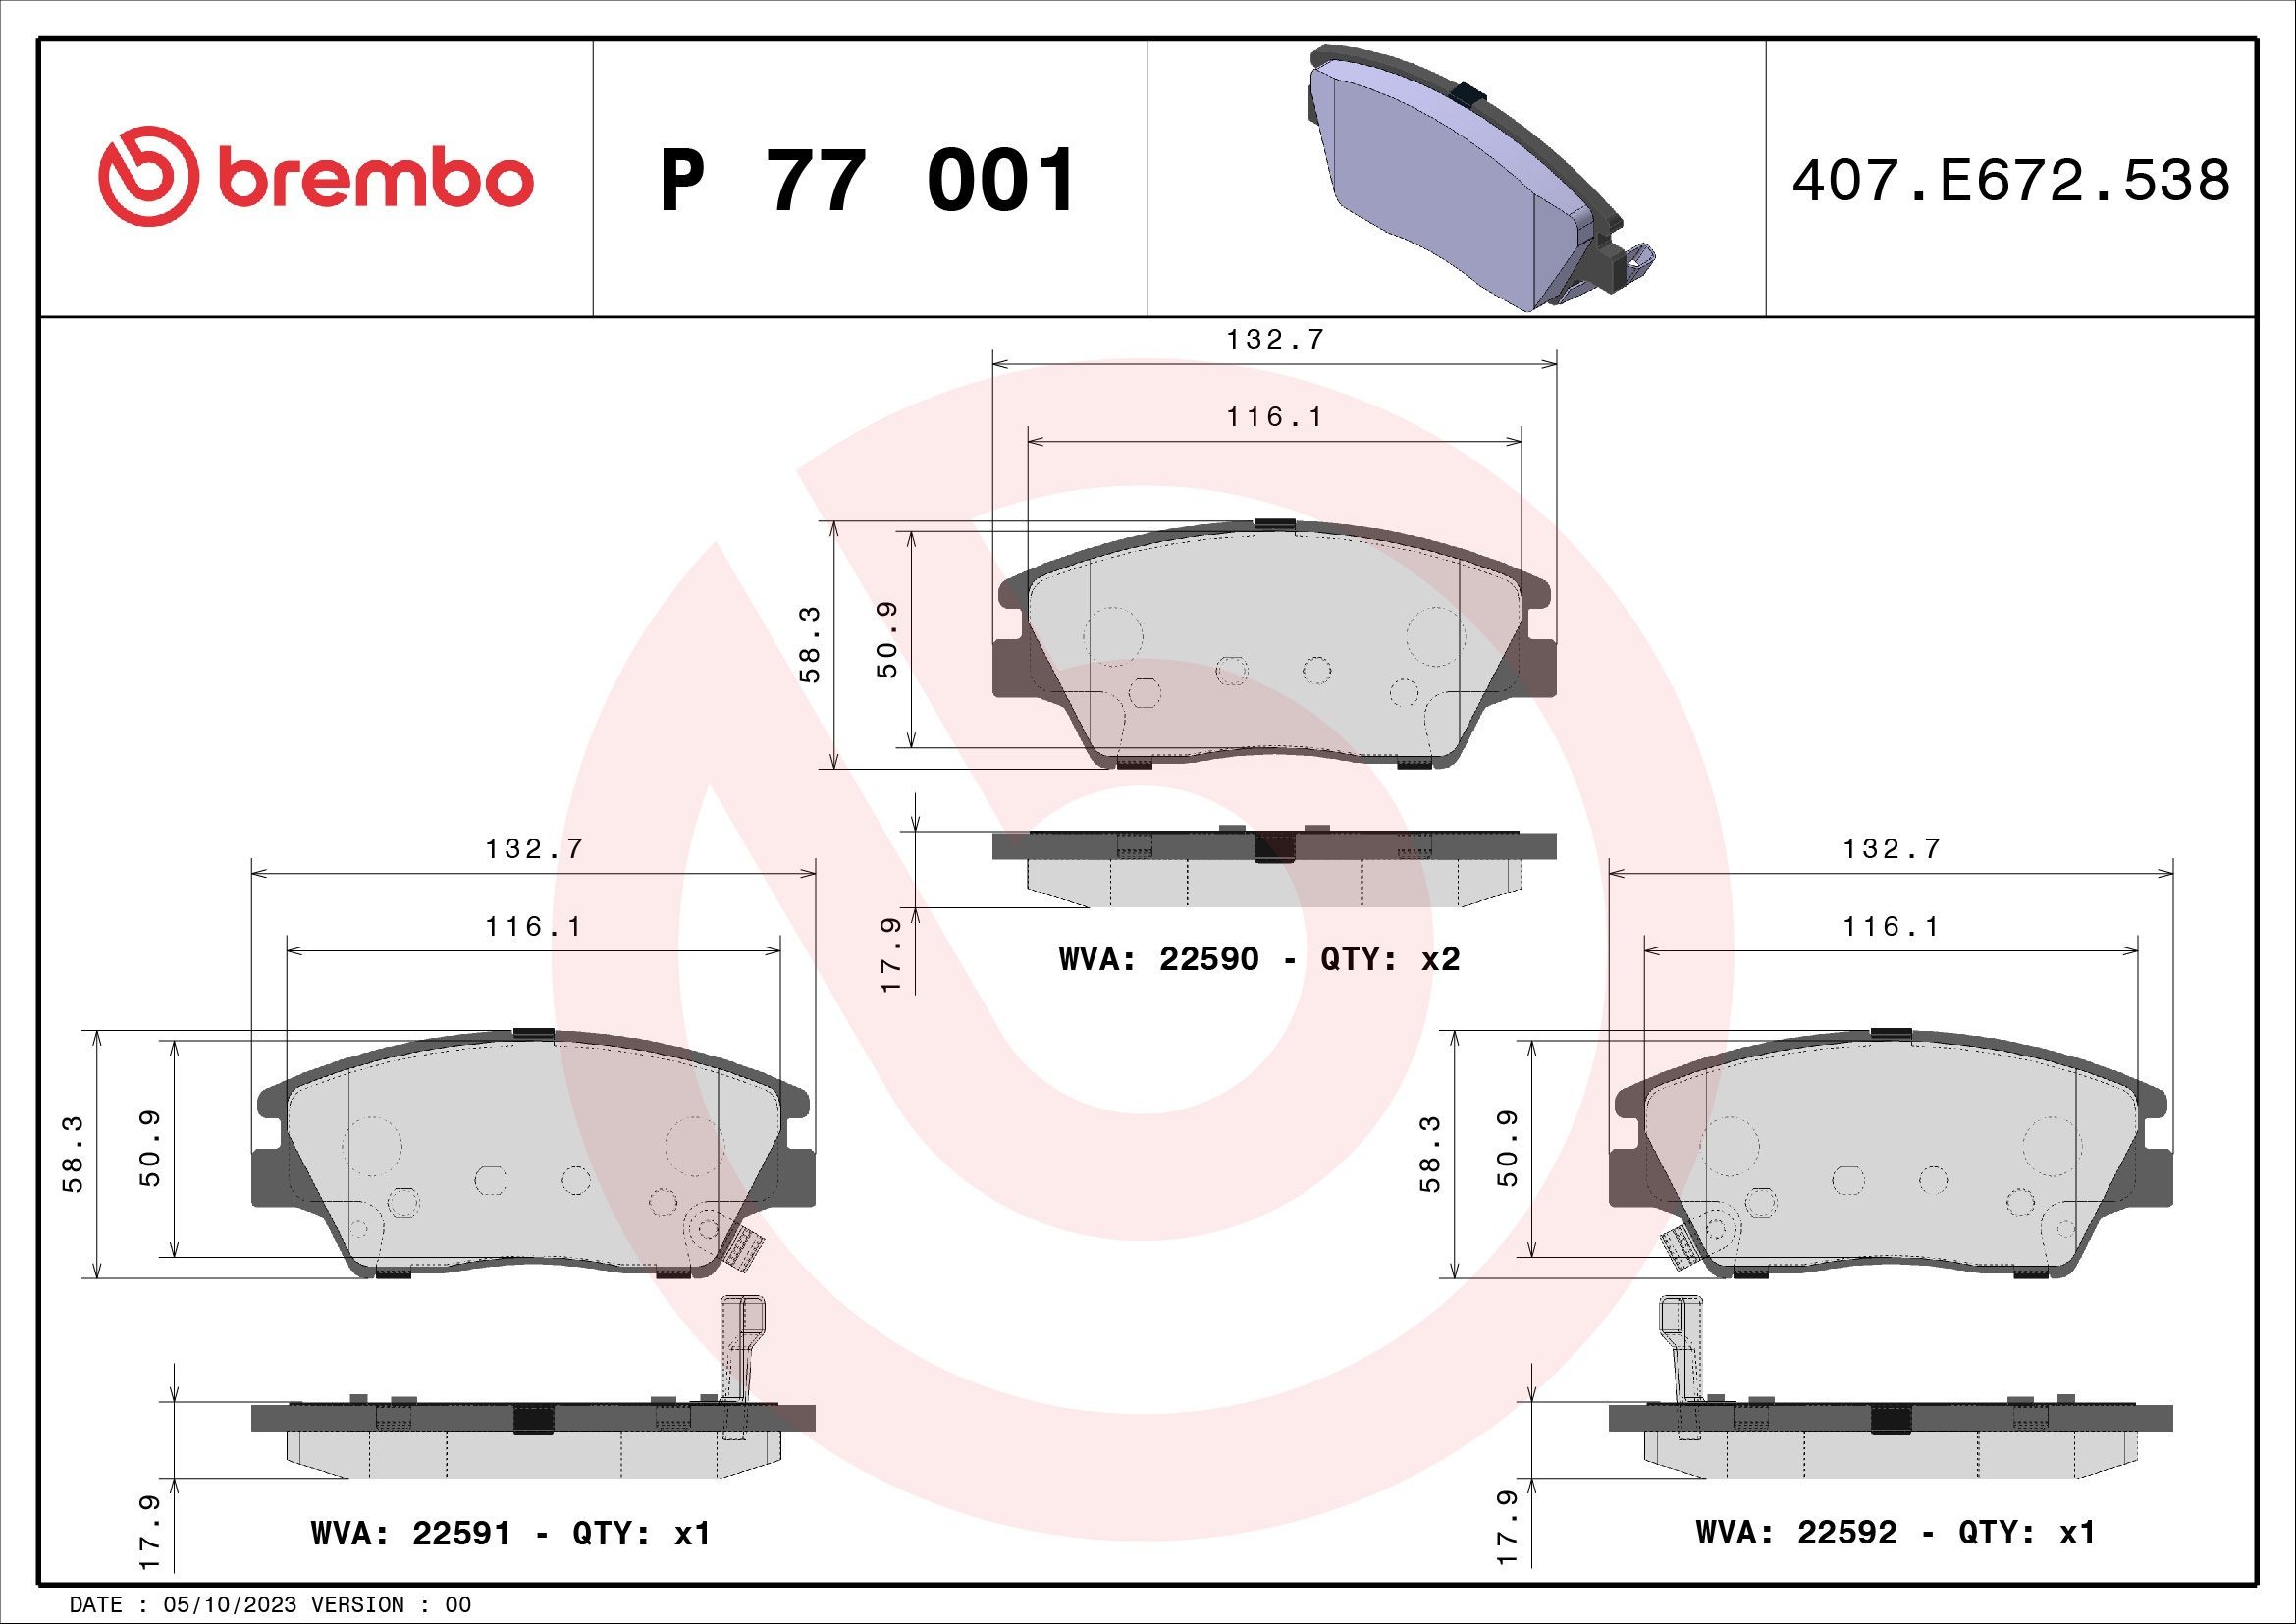 BREMBO P 77 001 Brake pad set with acoustic wear warning, without accessories